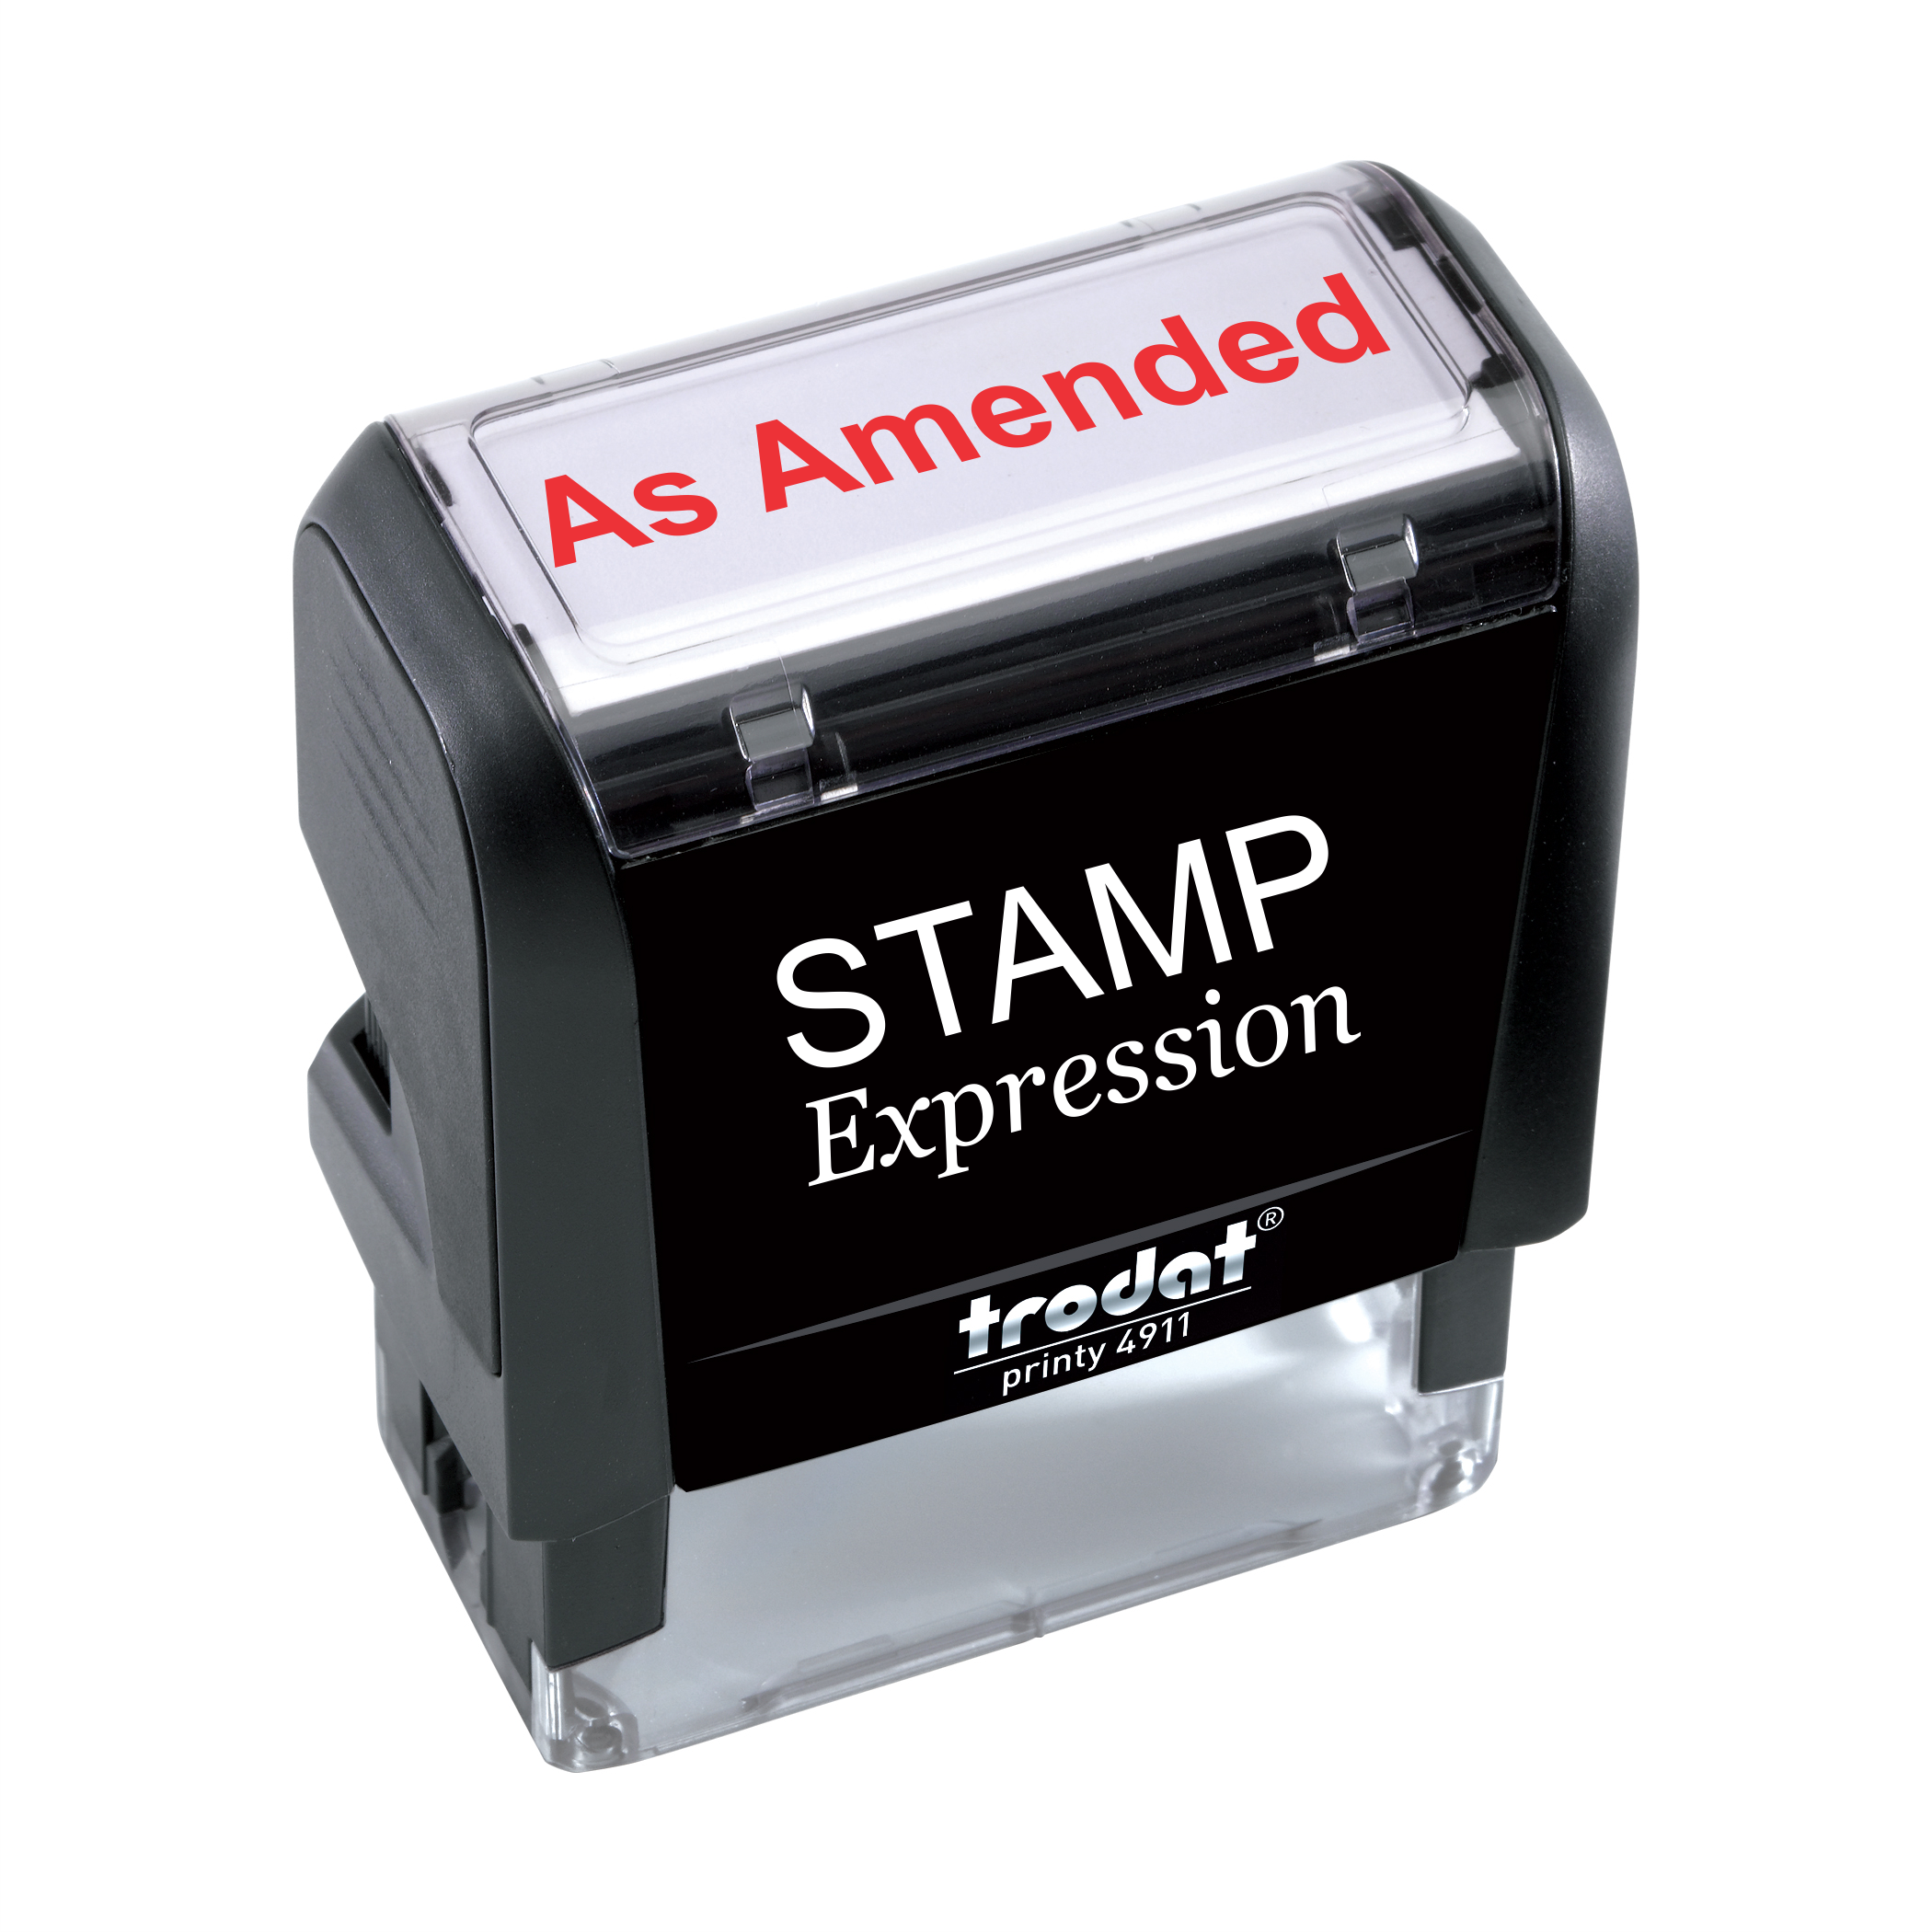 As Amended Office Self Inking Rubber Stamp